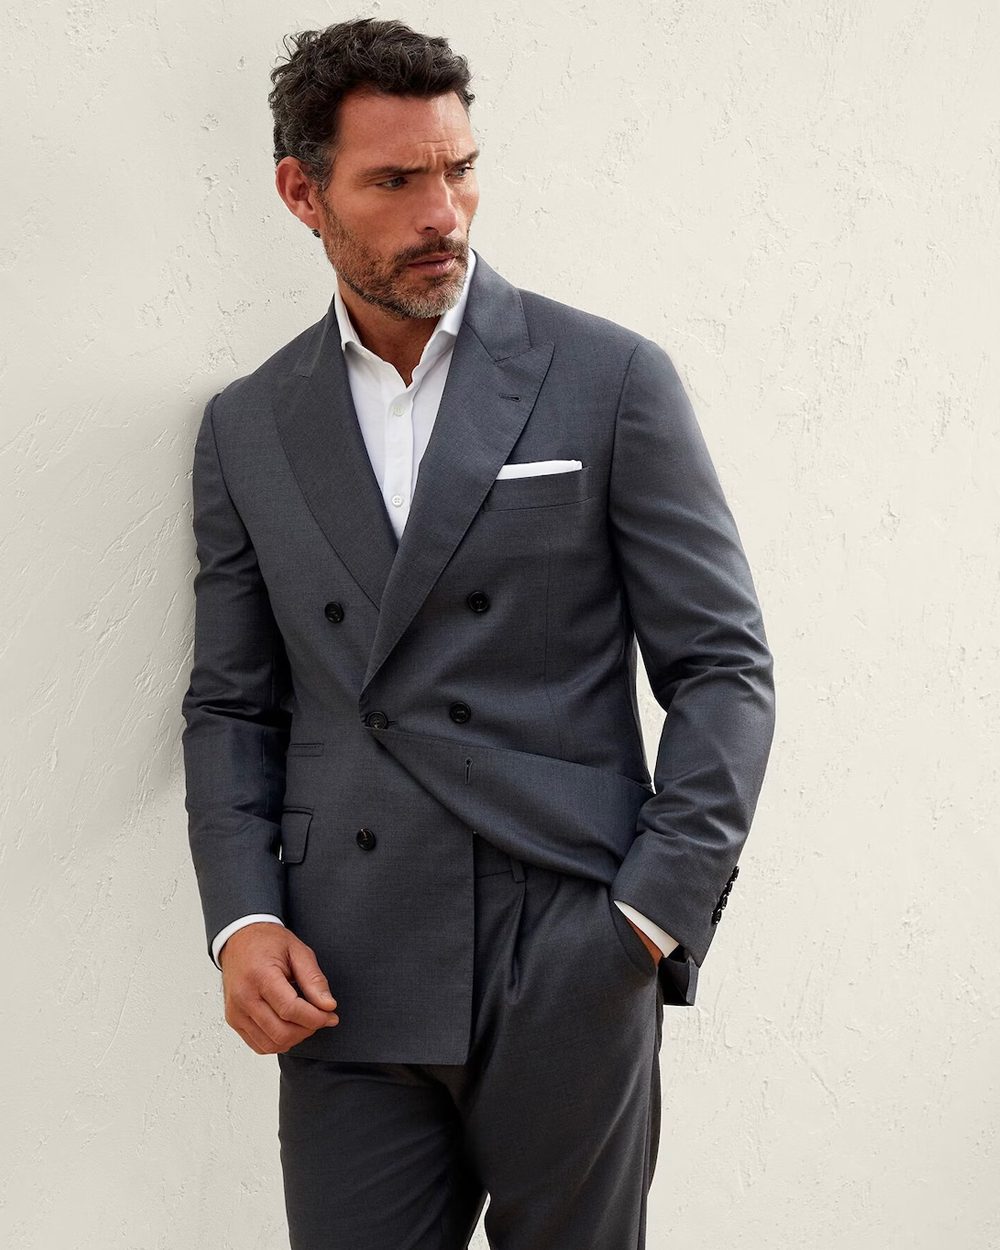 The Best Men's Double-Breasted Suit Brands: 2023 Edition